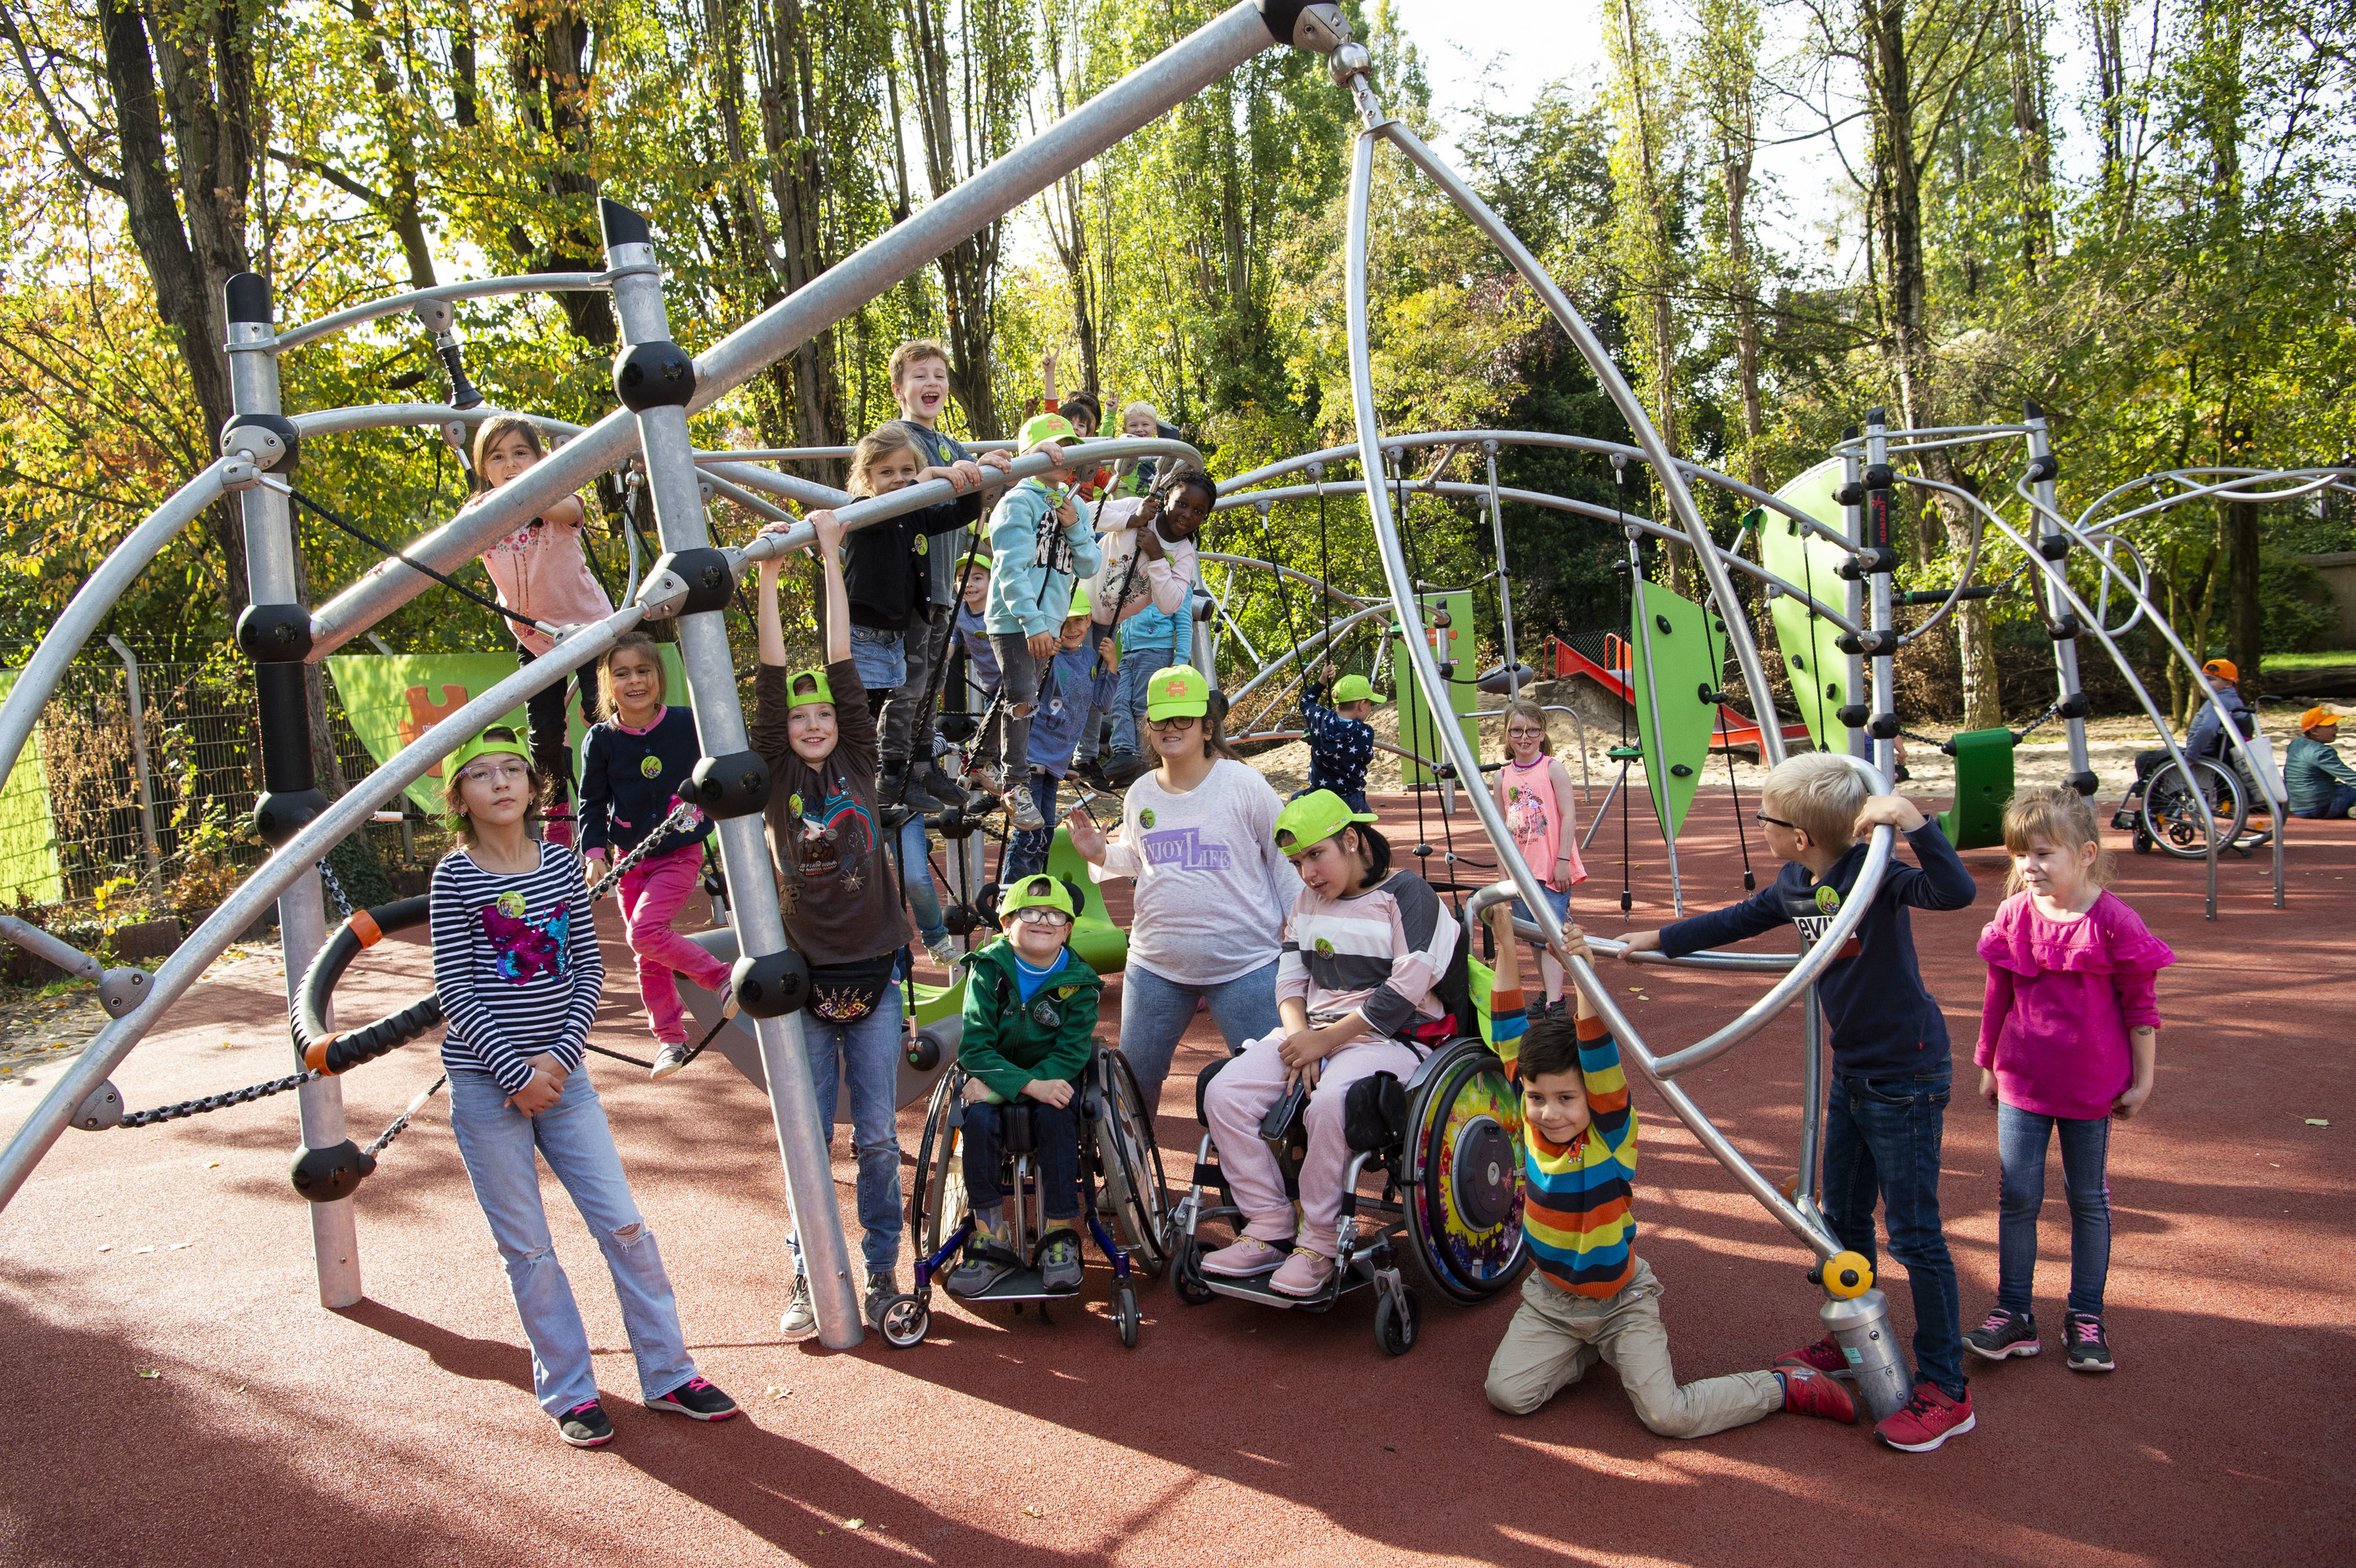 A group of children posing in front of an elaborate playground full of swings and ropes.